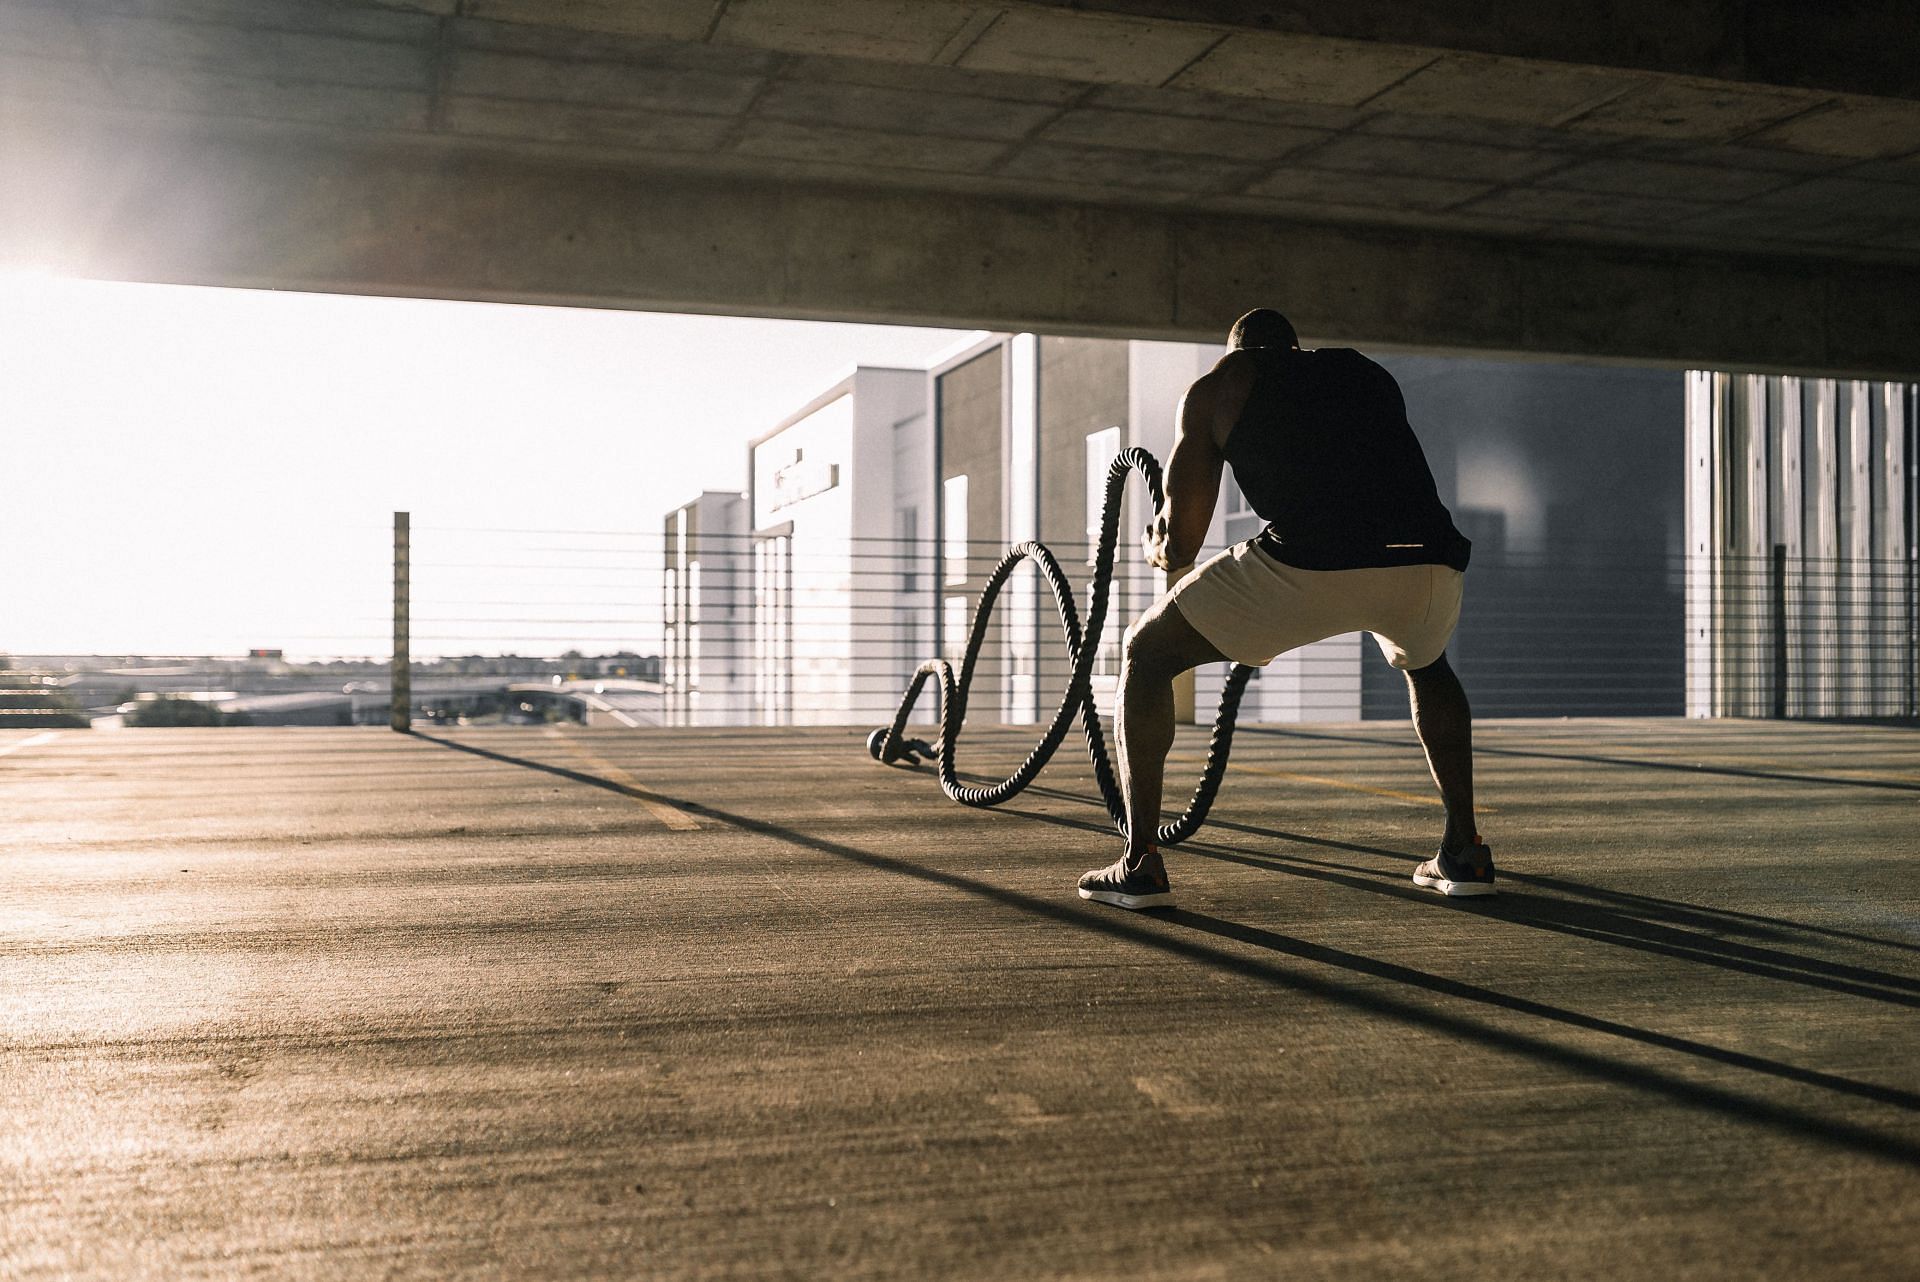 Exercises help you to burn fat and keep your body healthy. (Image via Unsplash / Karsten Winegeart)